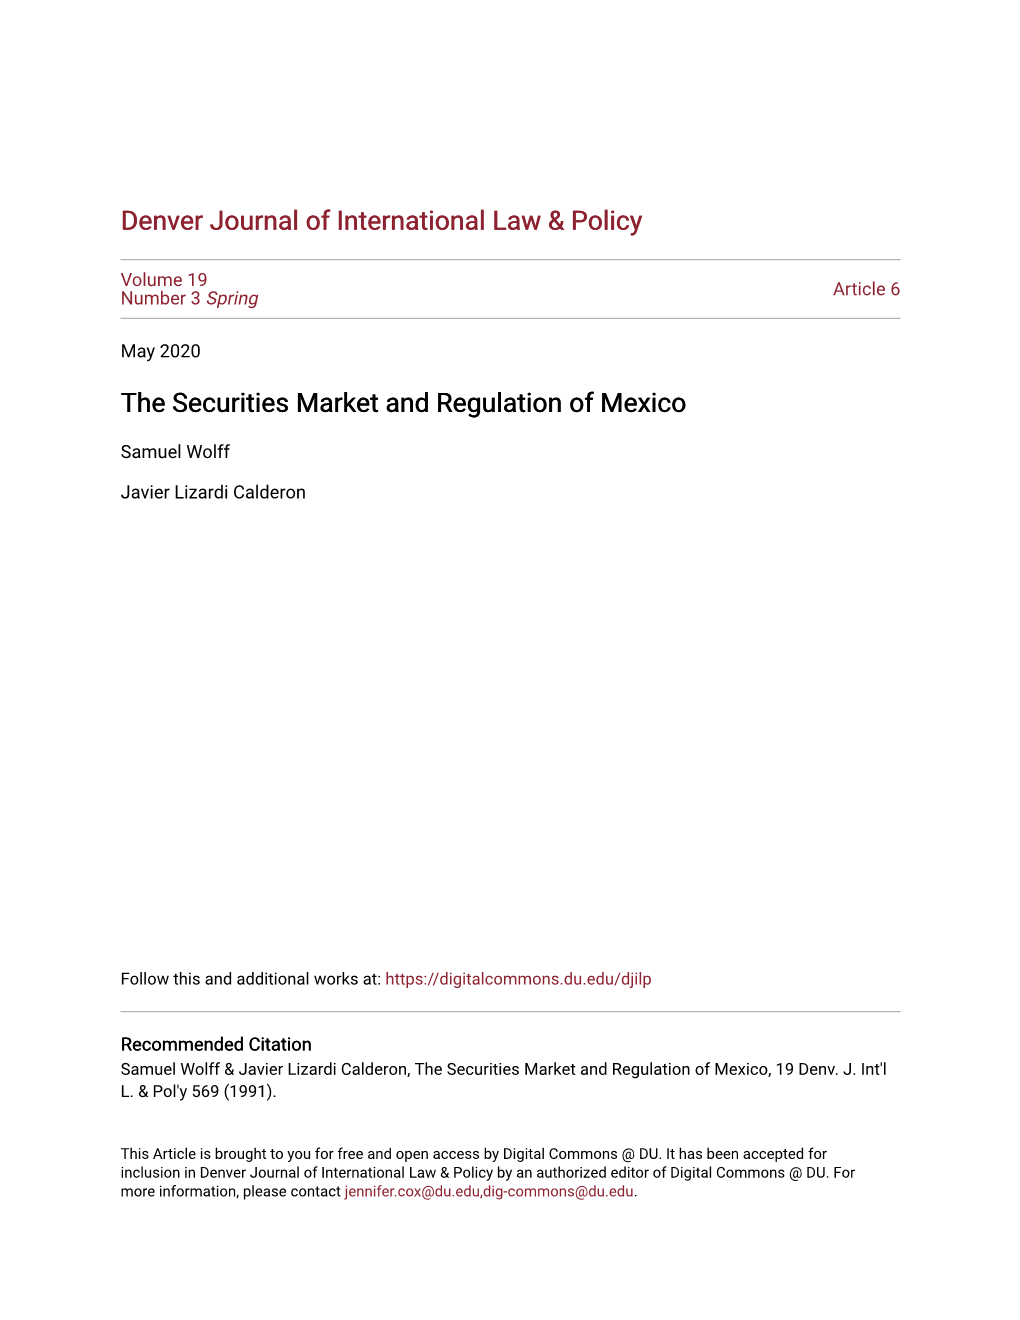 The Securities Market and Regulation of Mexico